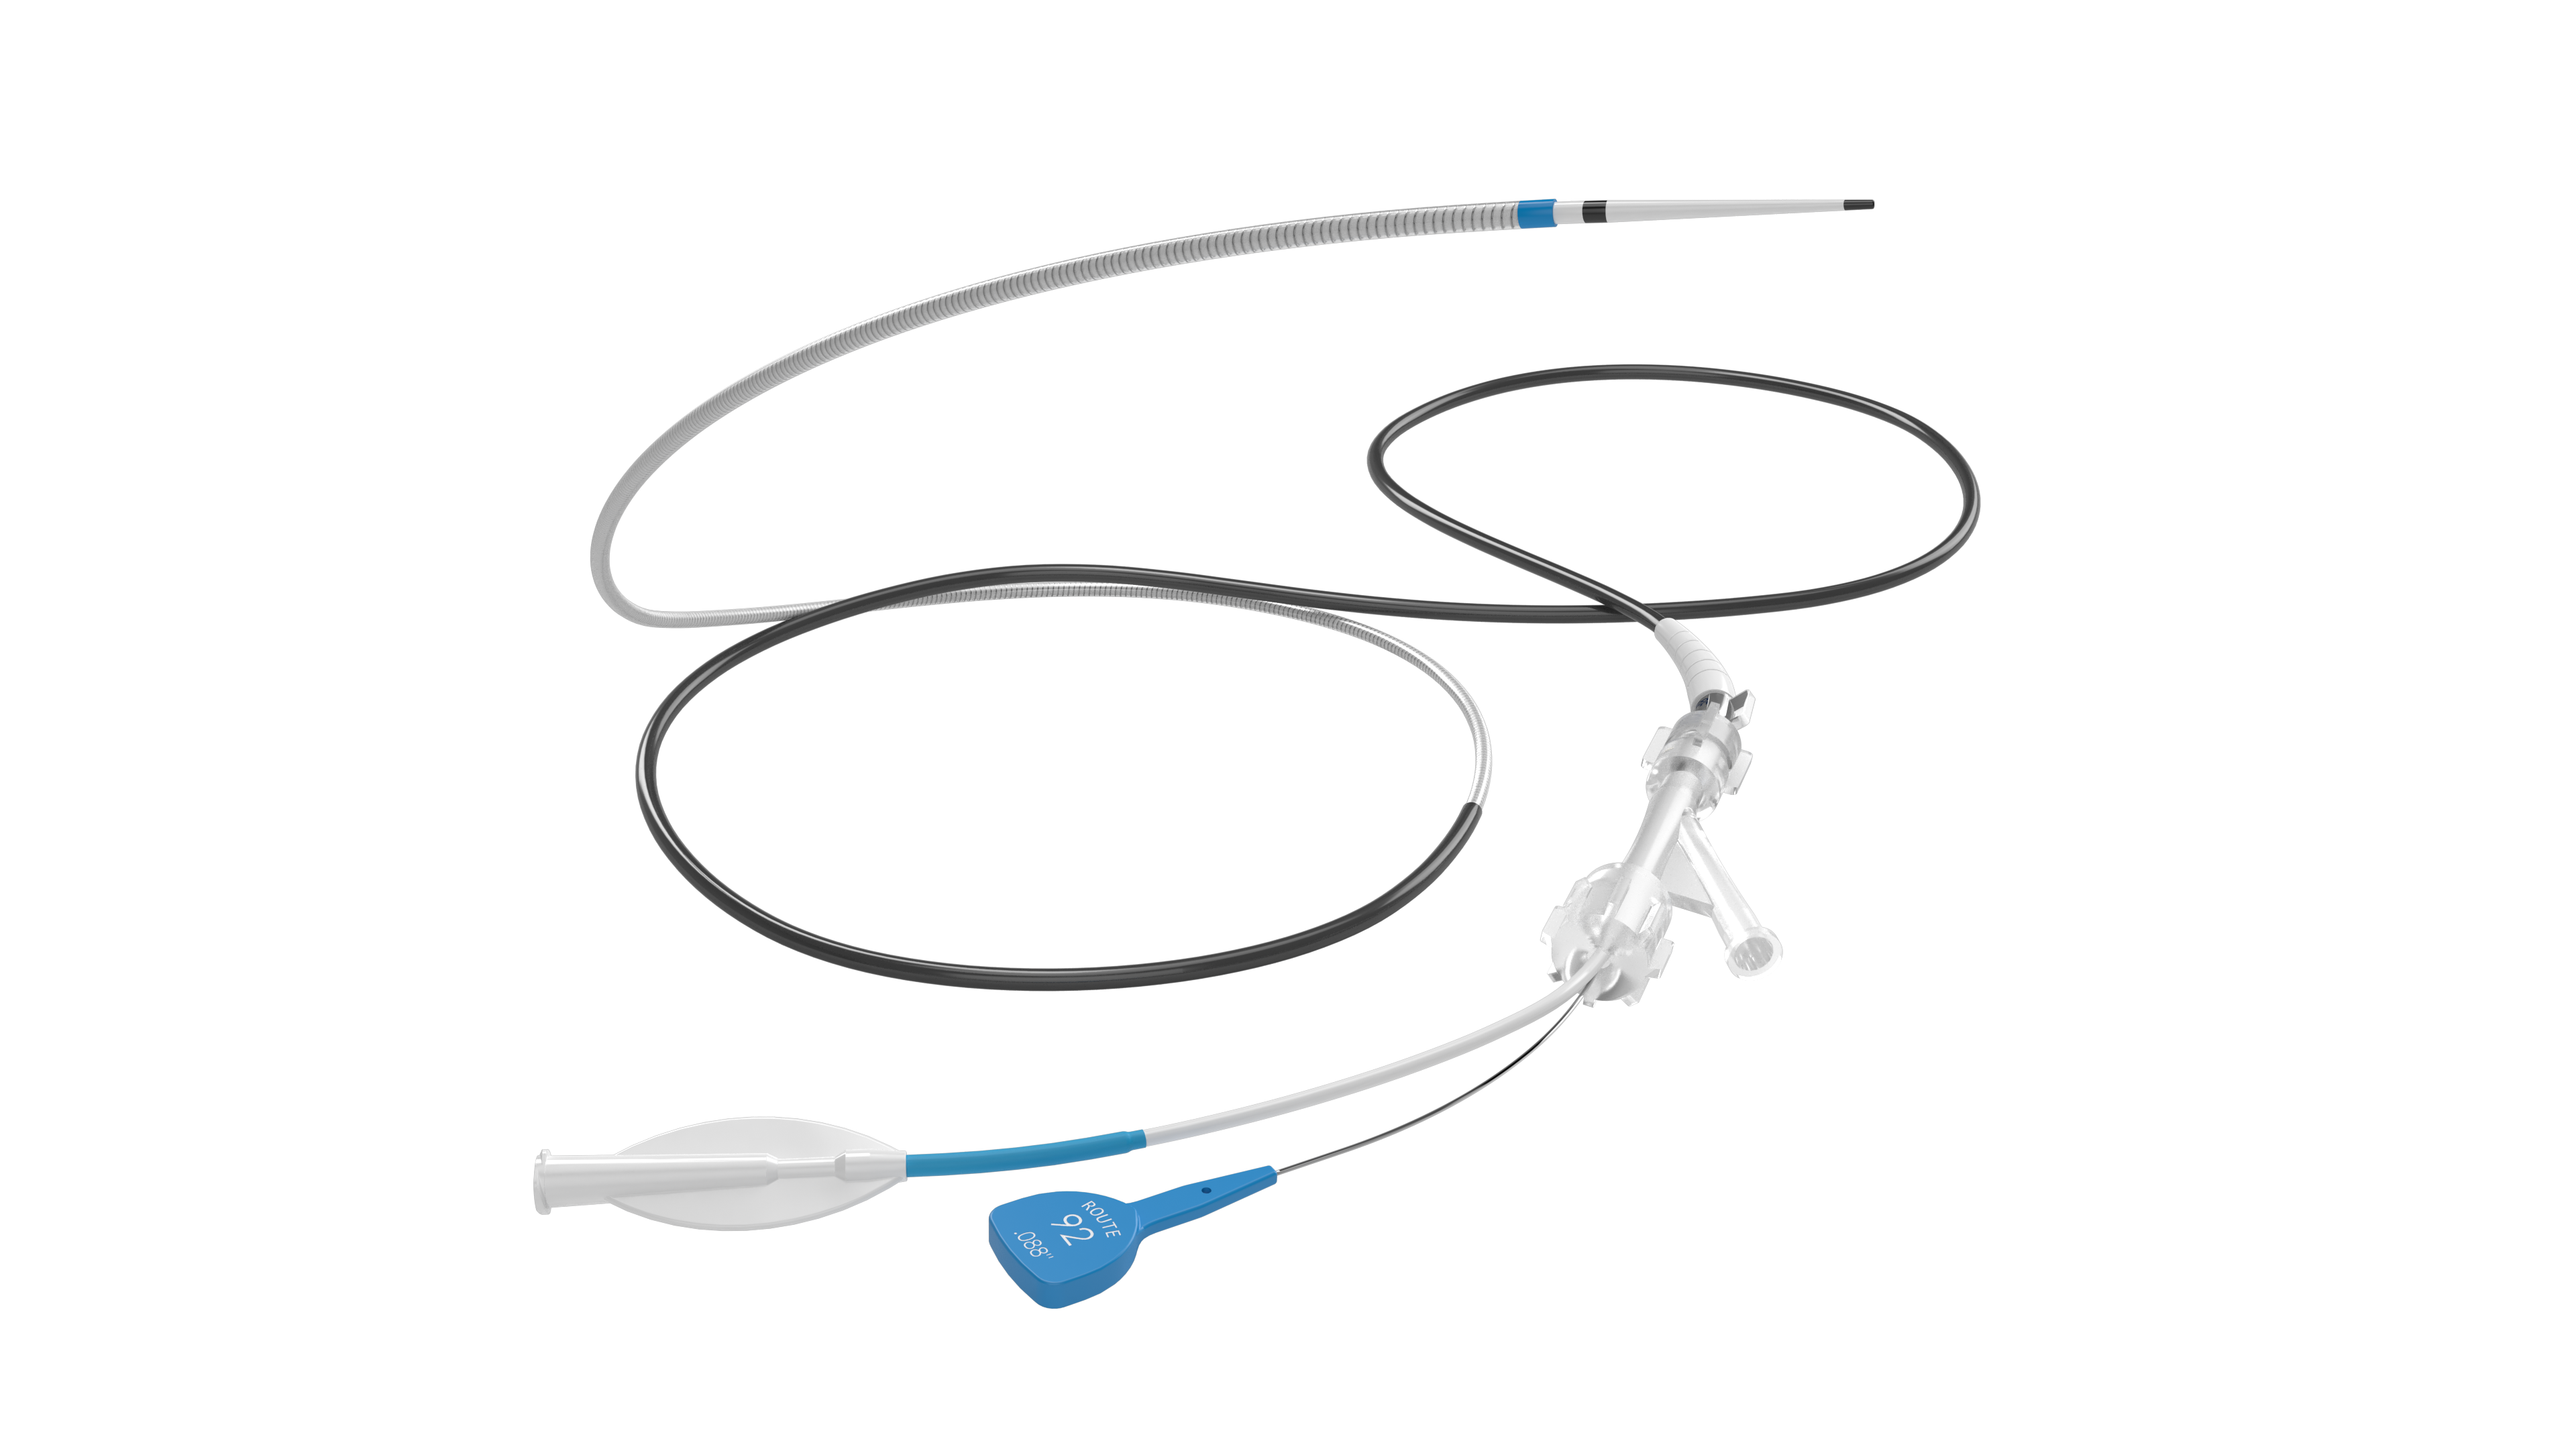 Monopoint® Reperfusion System including Basecamp® Sheath, HiPoint™ 88 Catheter, and Tenzing® 8 Catheter